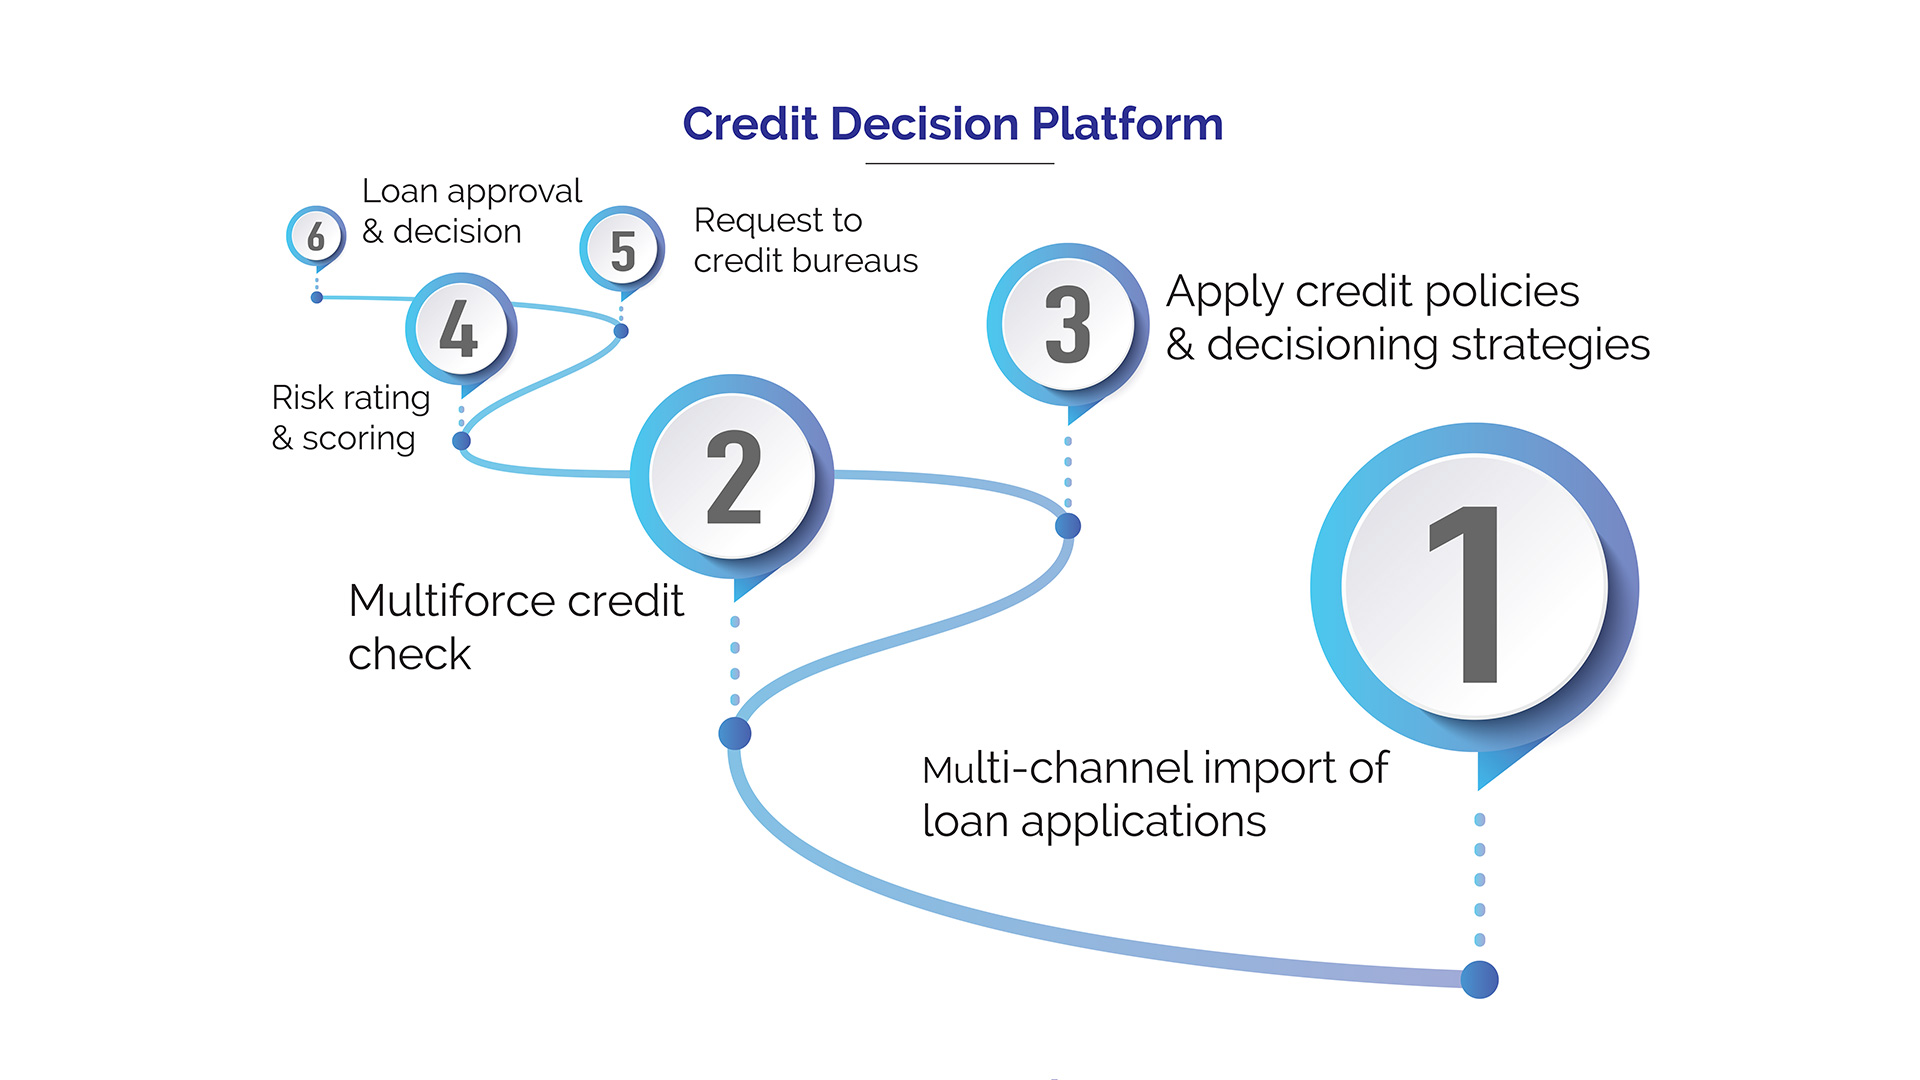 Instant Loan in 1 Hour-Credit decision